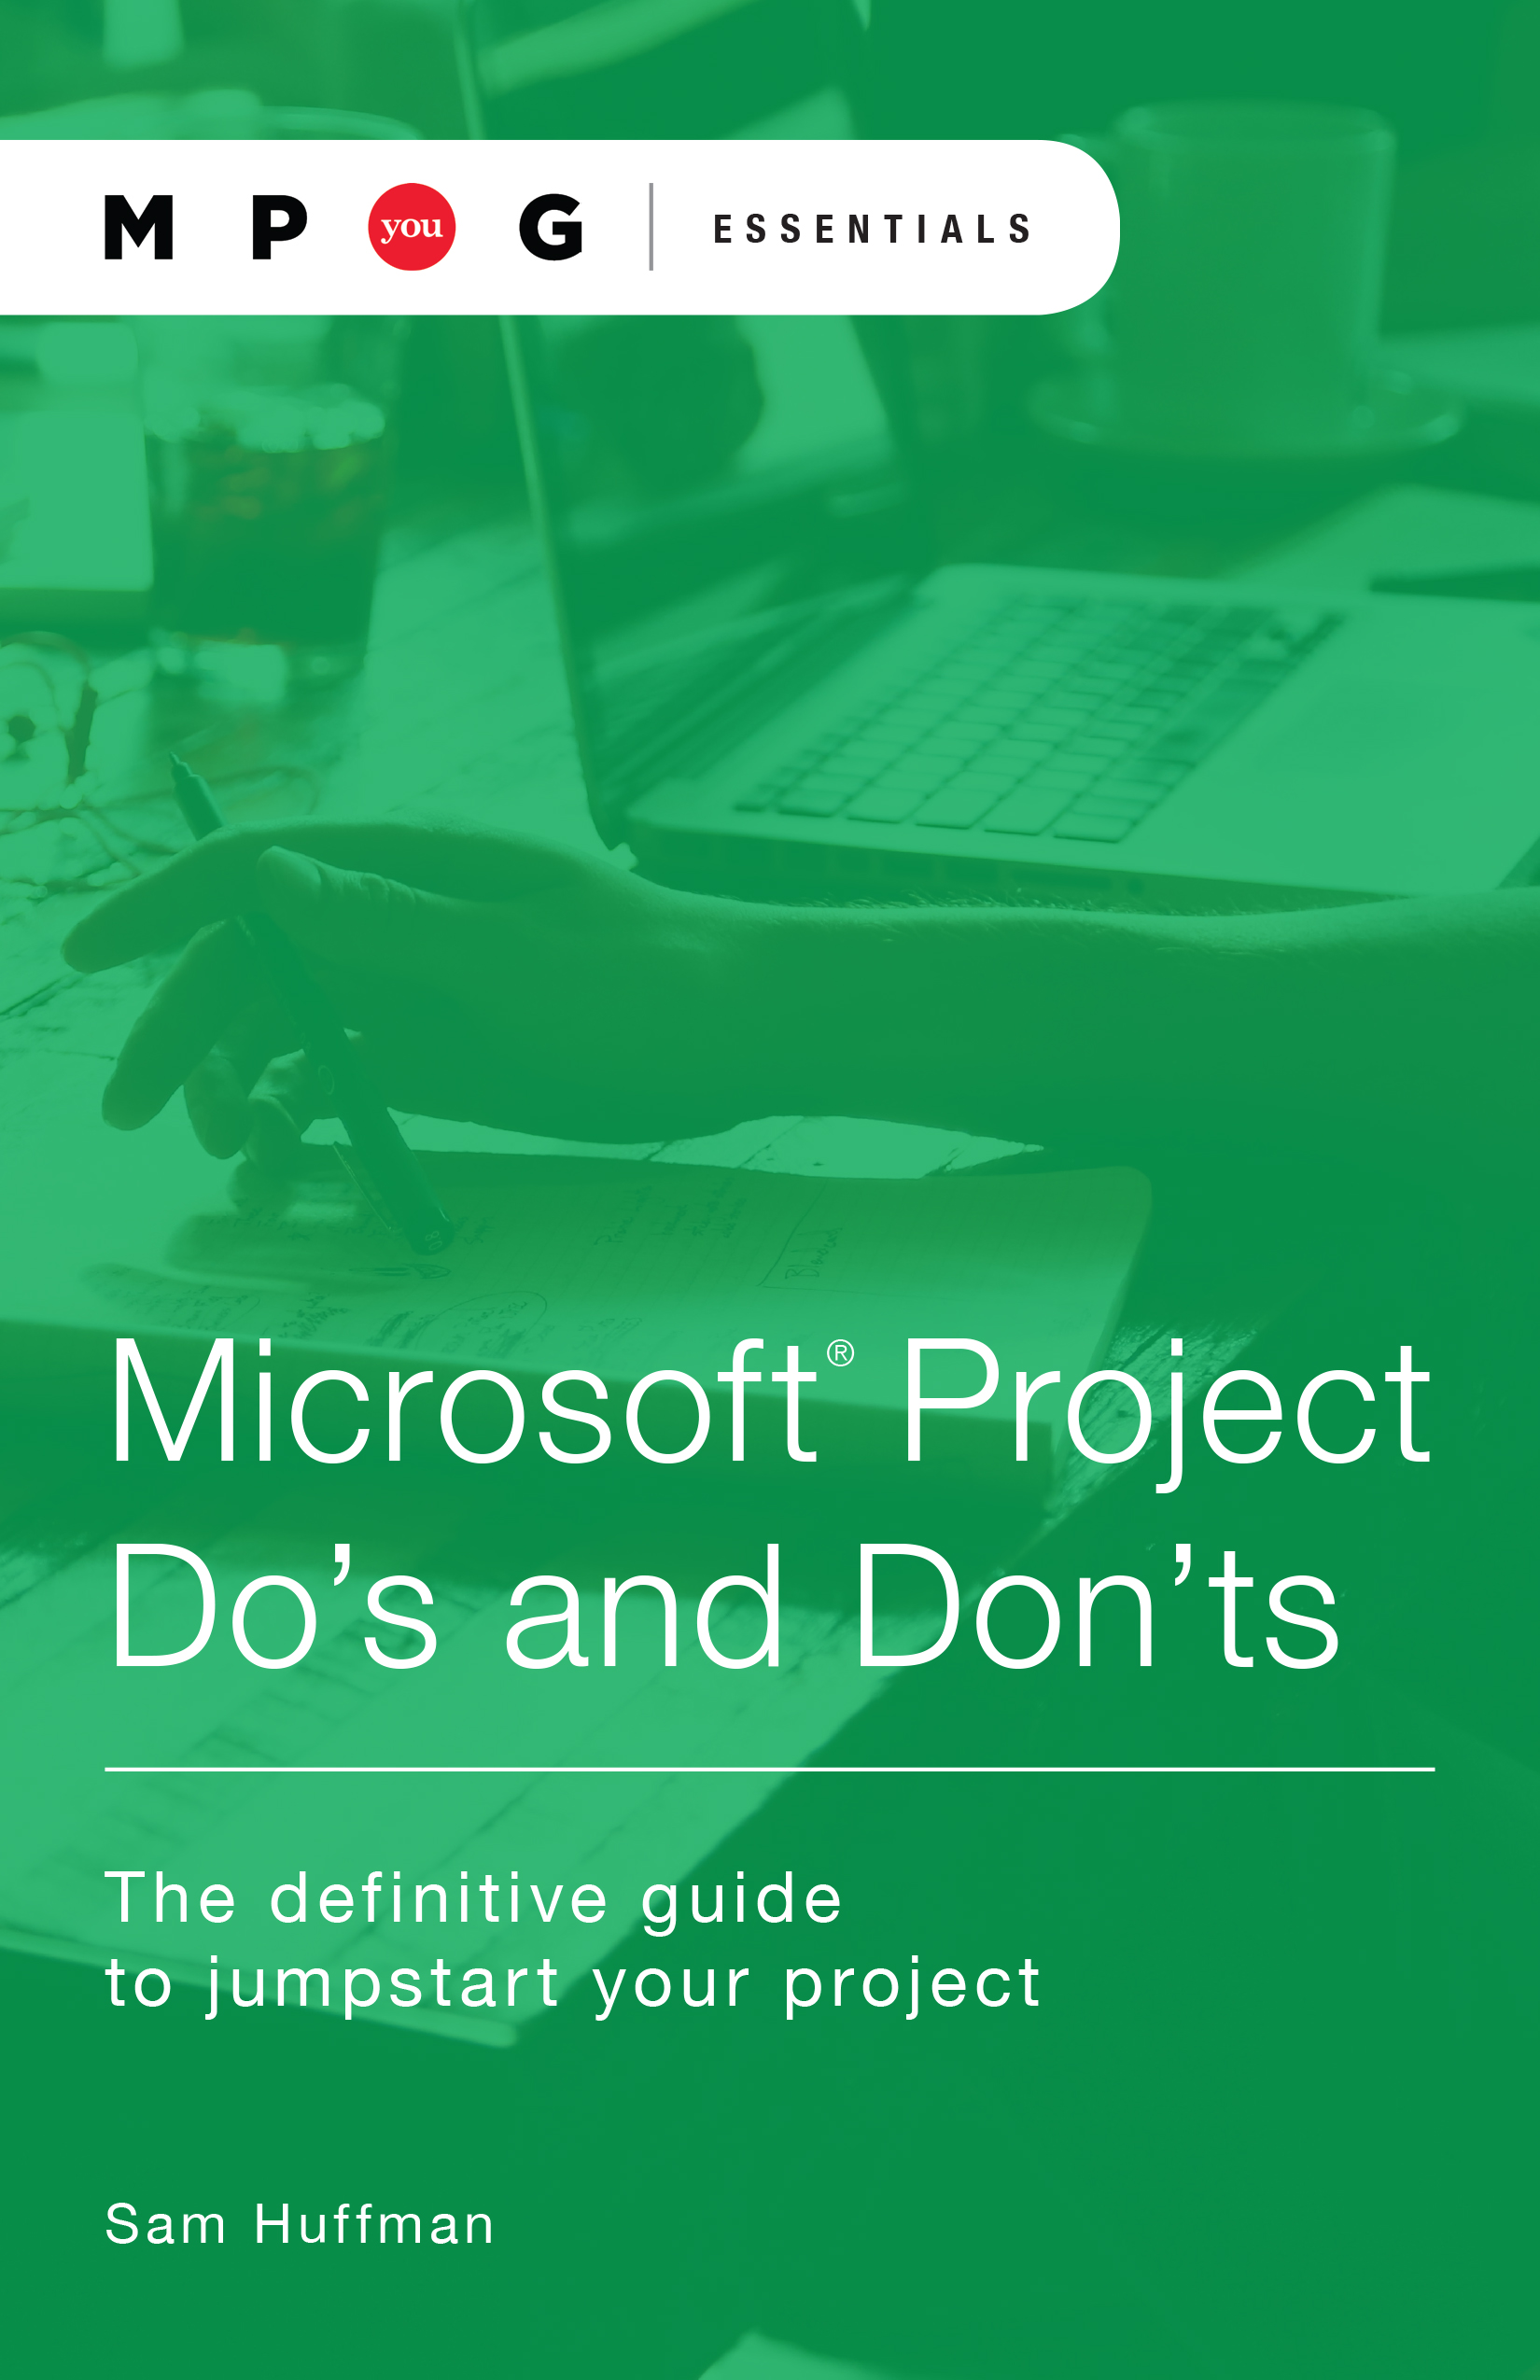 Microsoft® Project Do’s and Don’ts